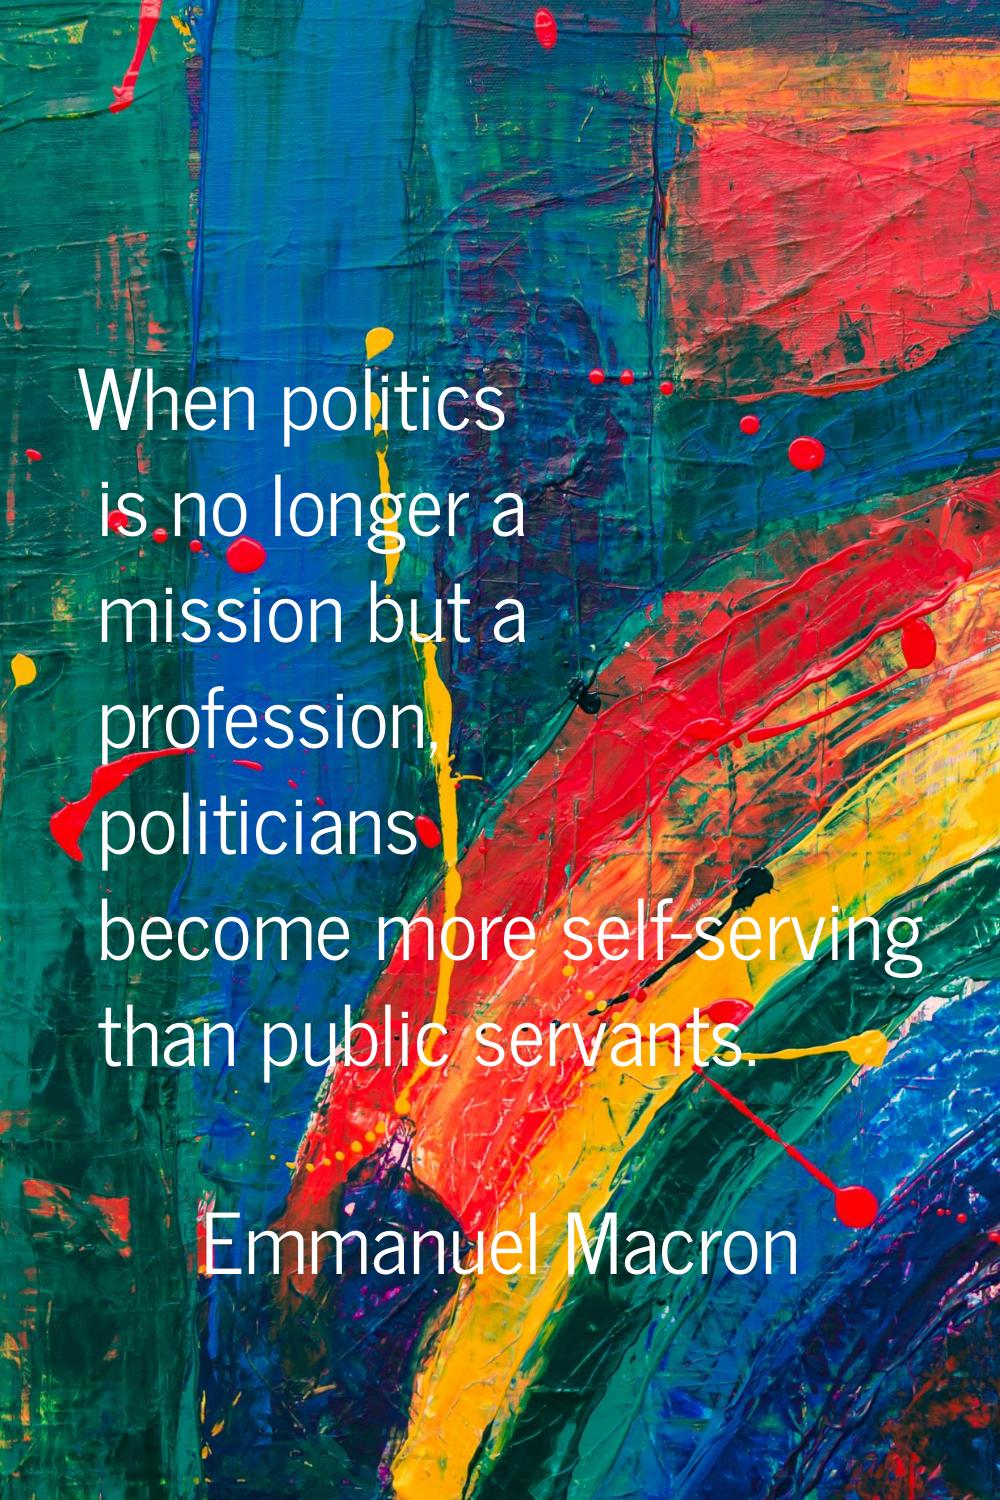 When politics is no longer a mission but a profession, politicians become more self-serving than pu